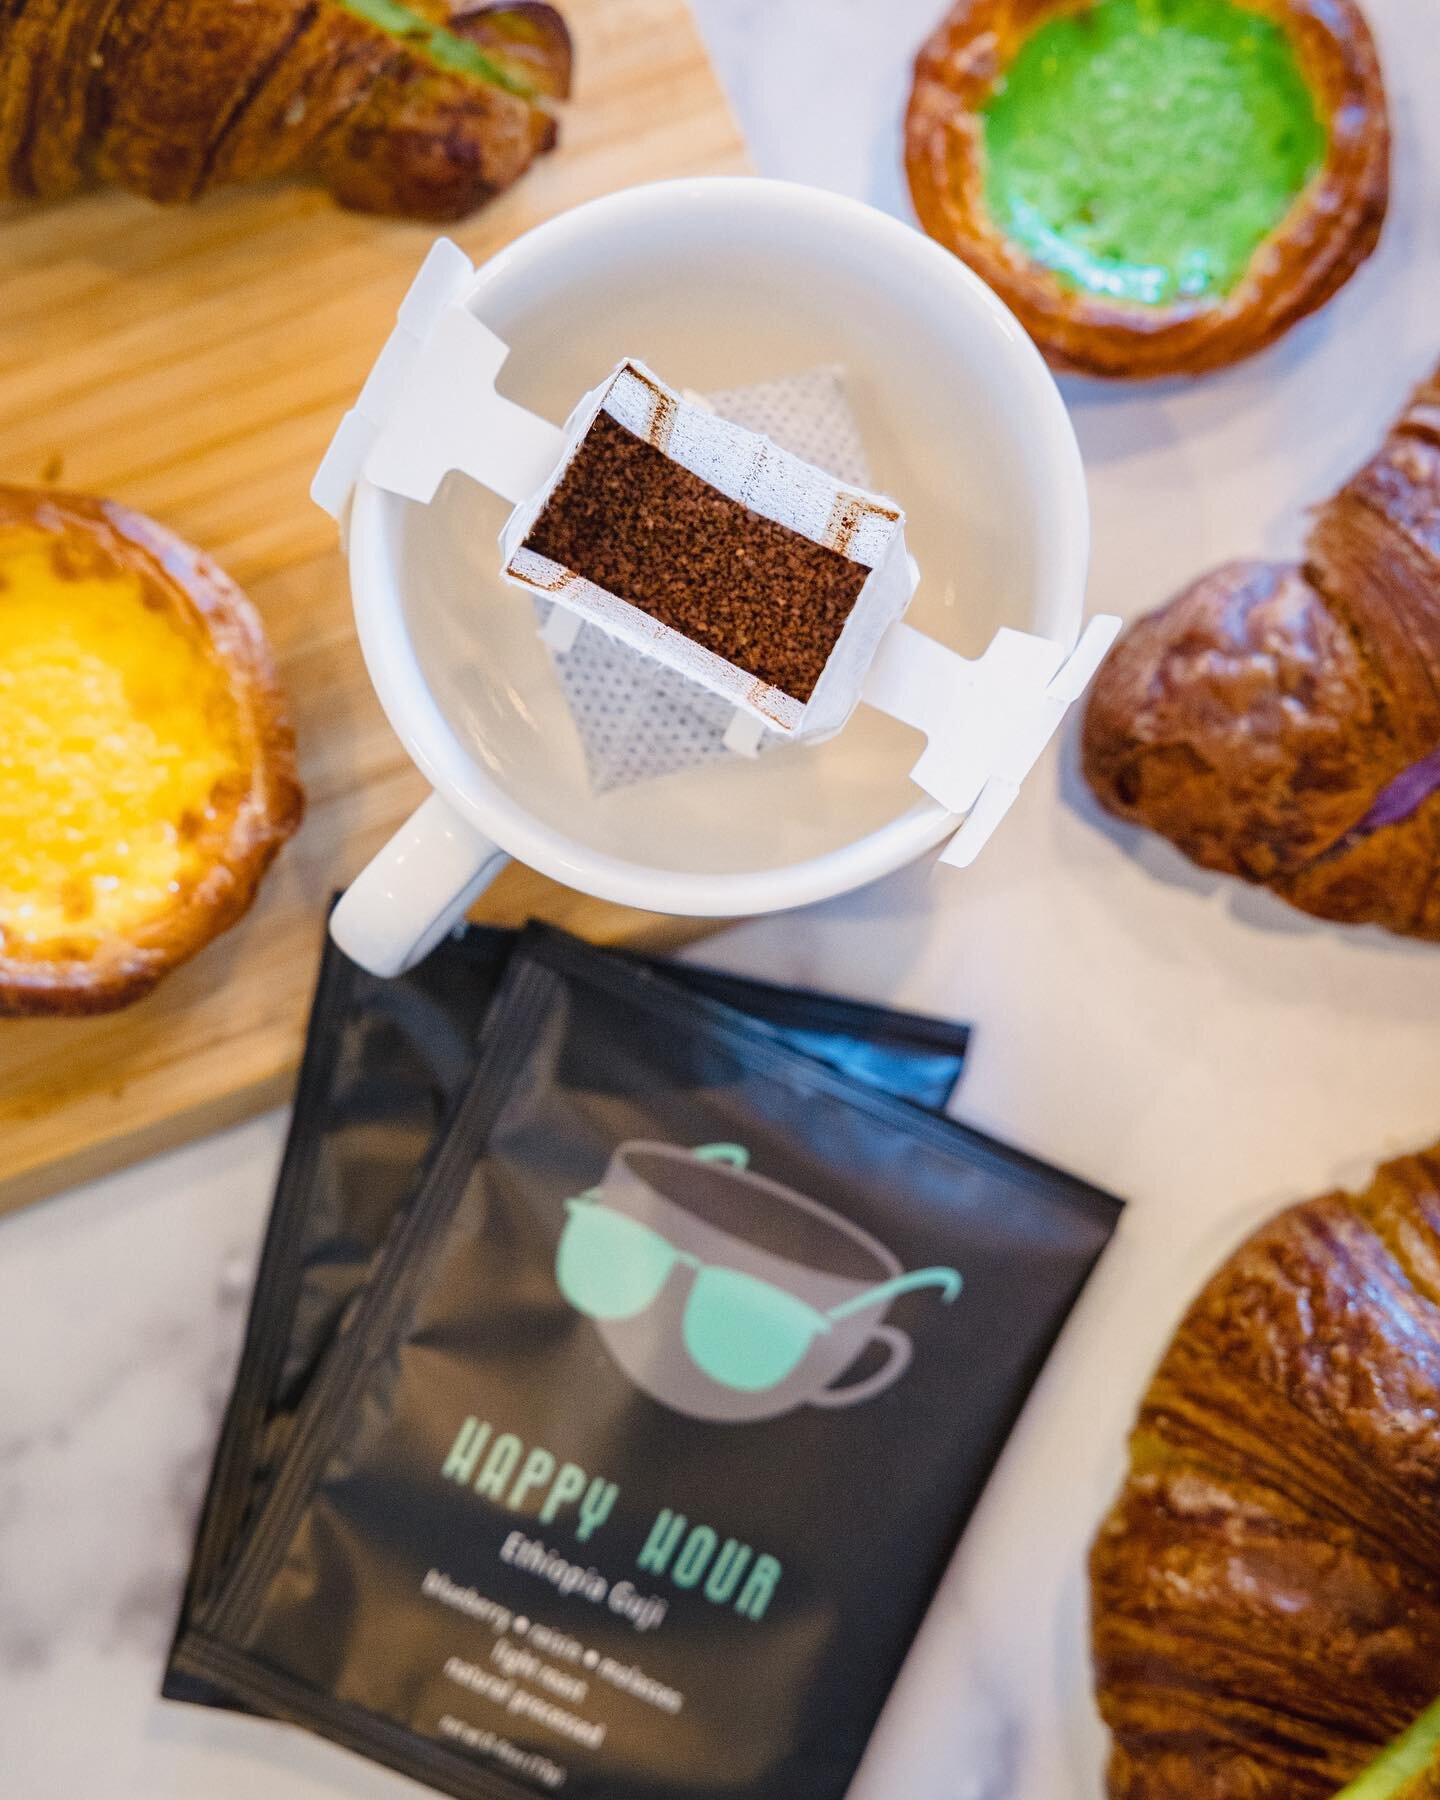 Baked goods + hangover coffee 👌🏻☕️

For a limited time, we&rsquo;ll be featuring hangover coffee pouches individually or bundled with an egg tart! Try out their delicious quick to make coffee pouches!